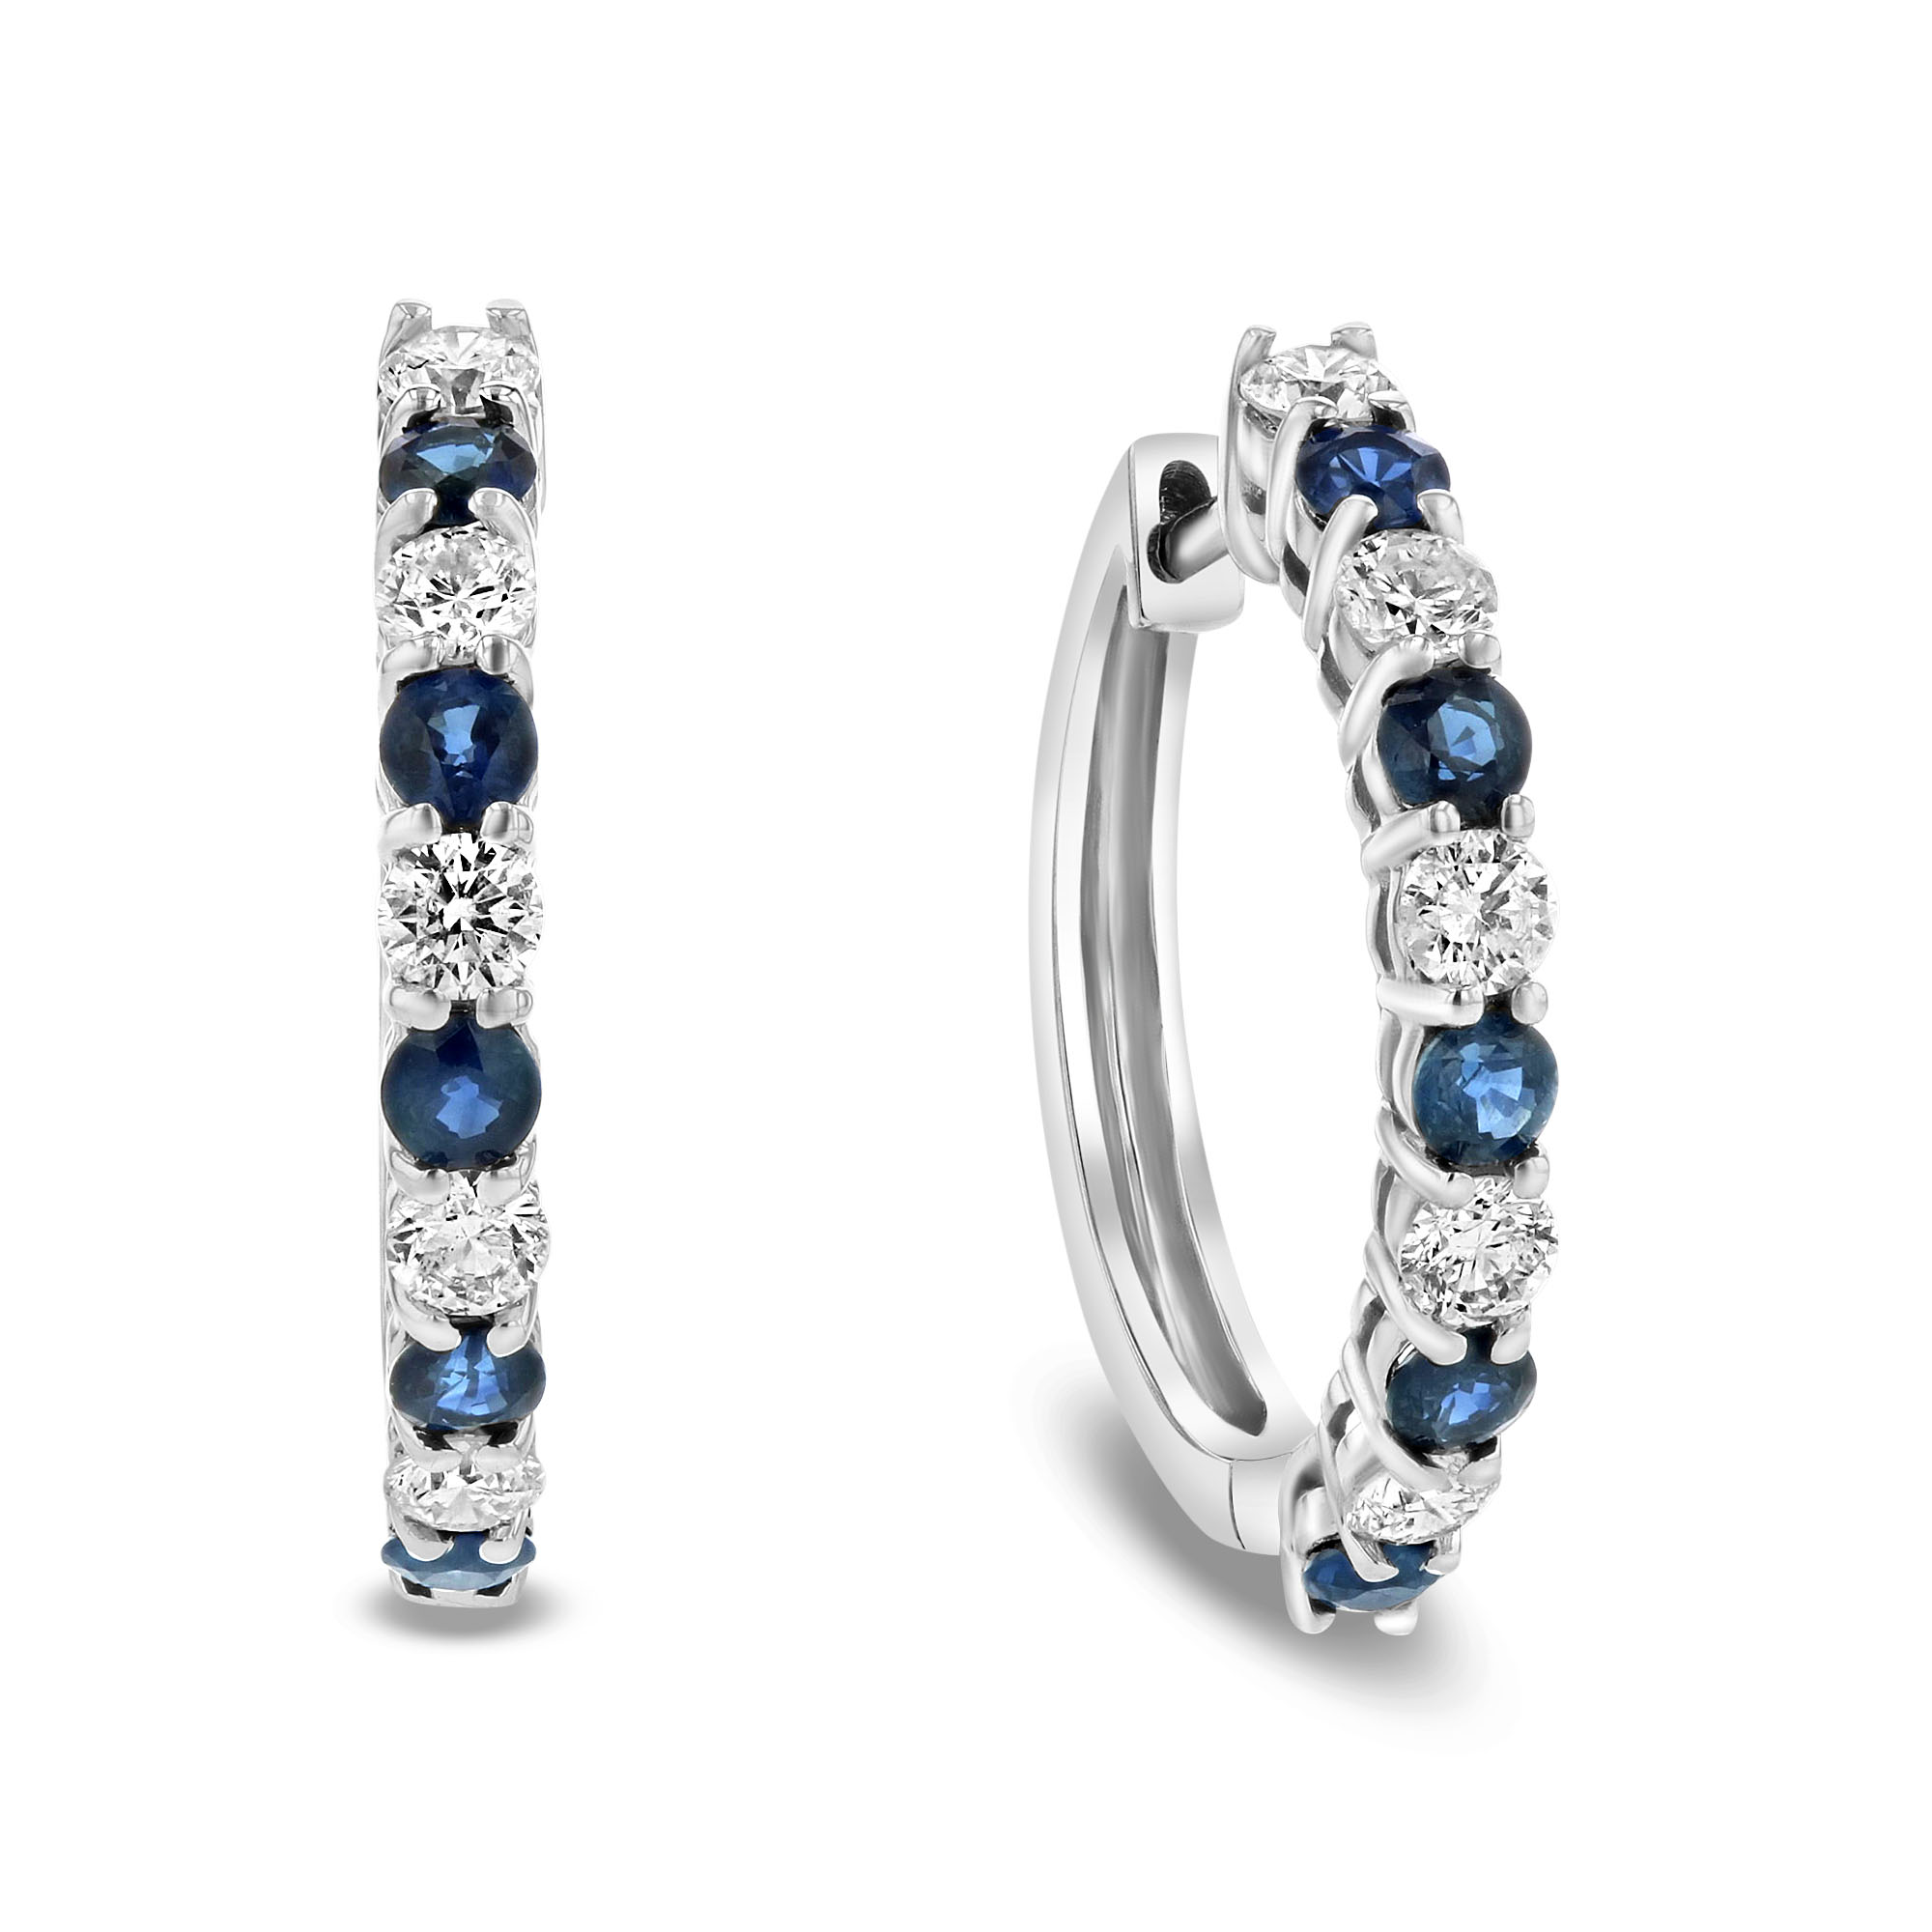 1.35ctw Diamond and Sapphire Hoop Earrings in 14k White Gold